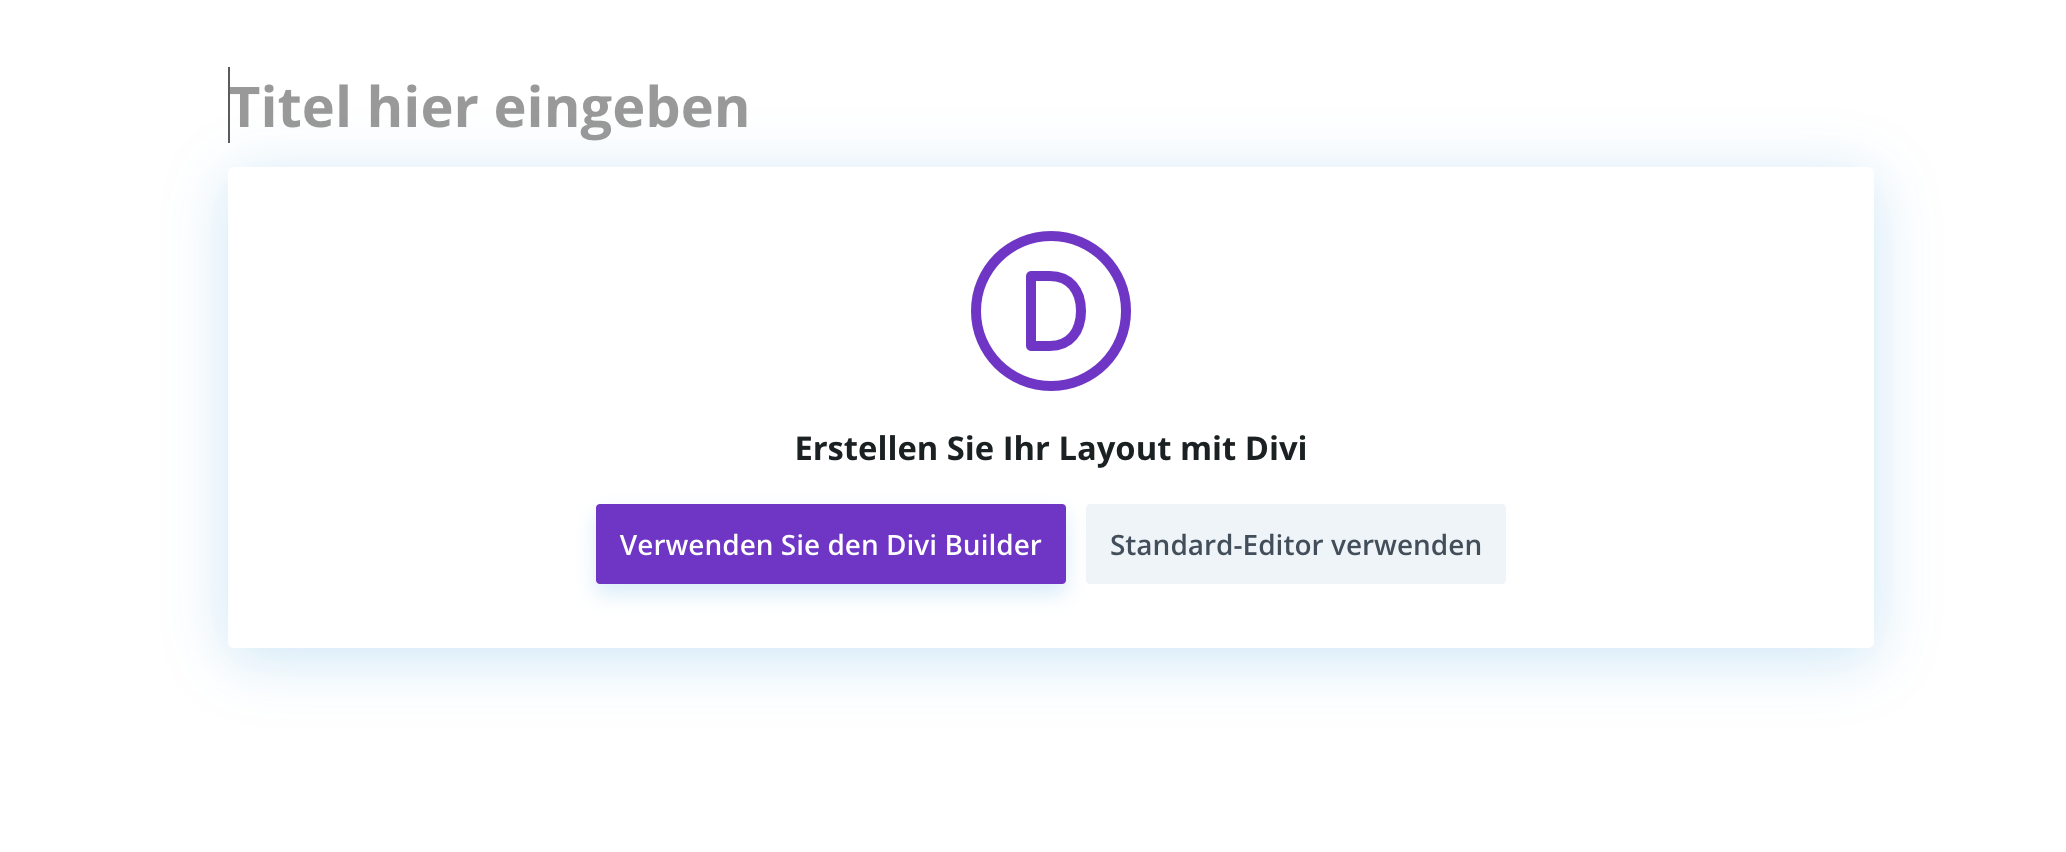 Use Divi Builder for your Site